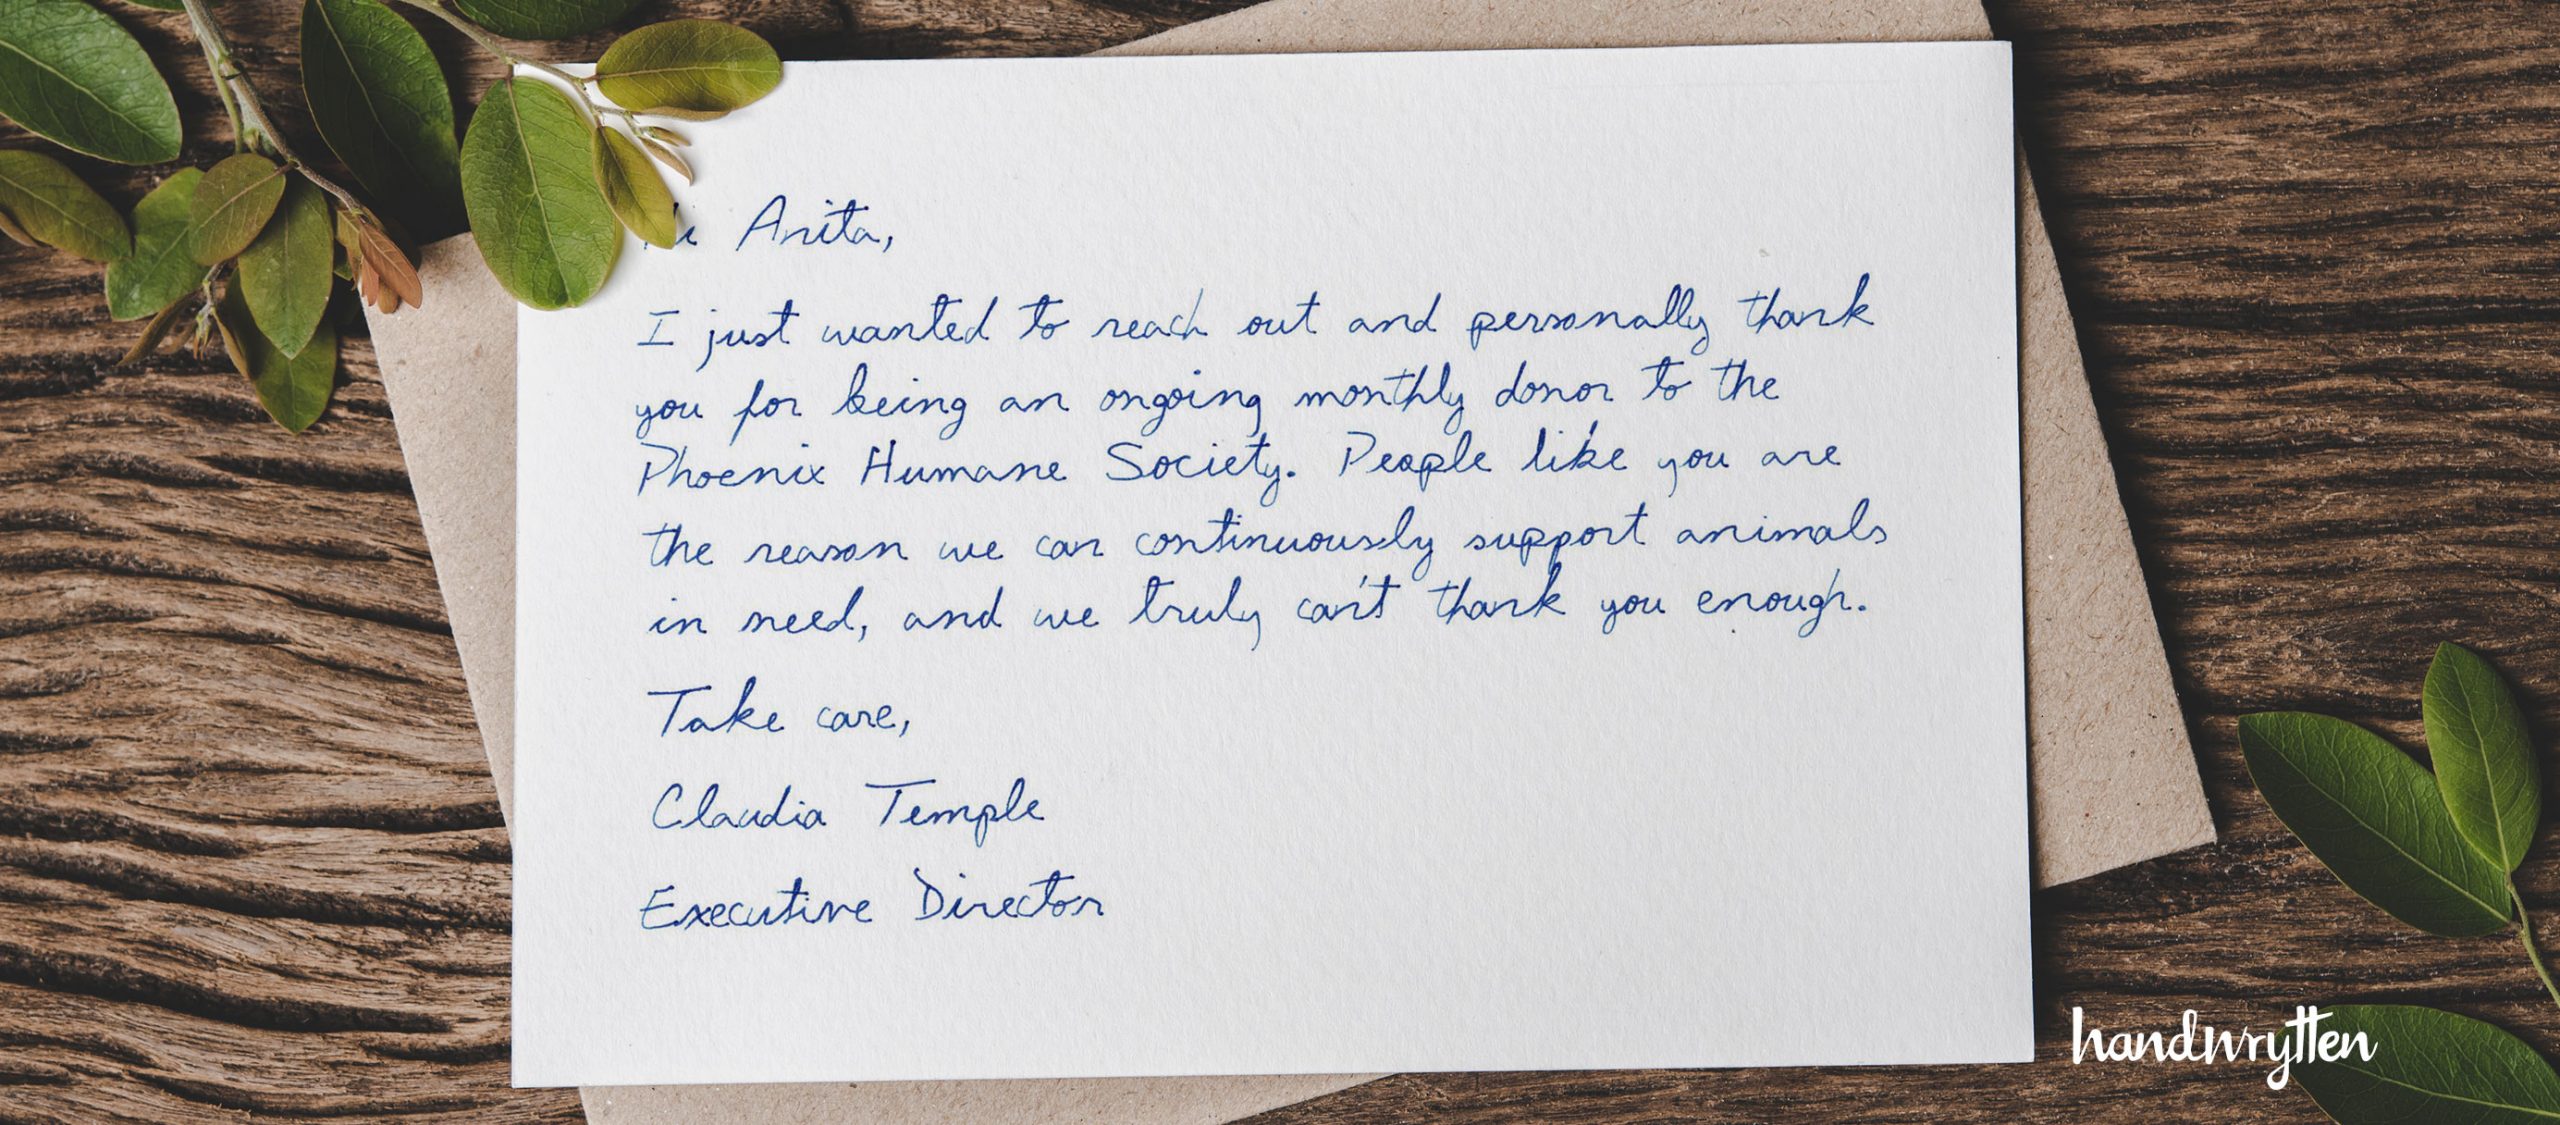 Top 10 Donation Thank You Letter Examples Handwrytten